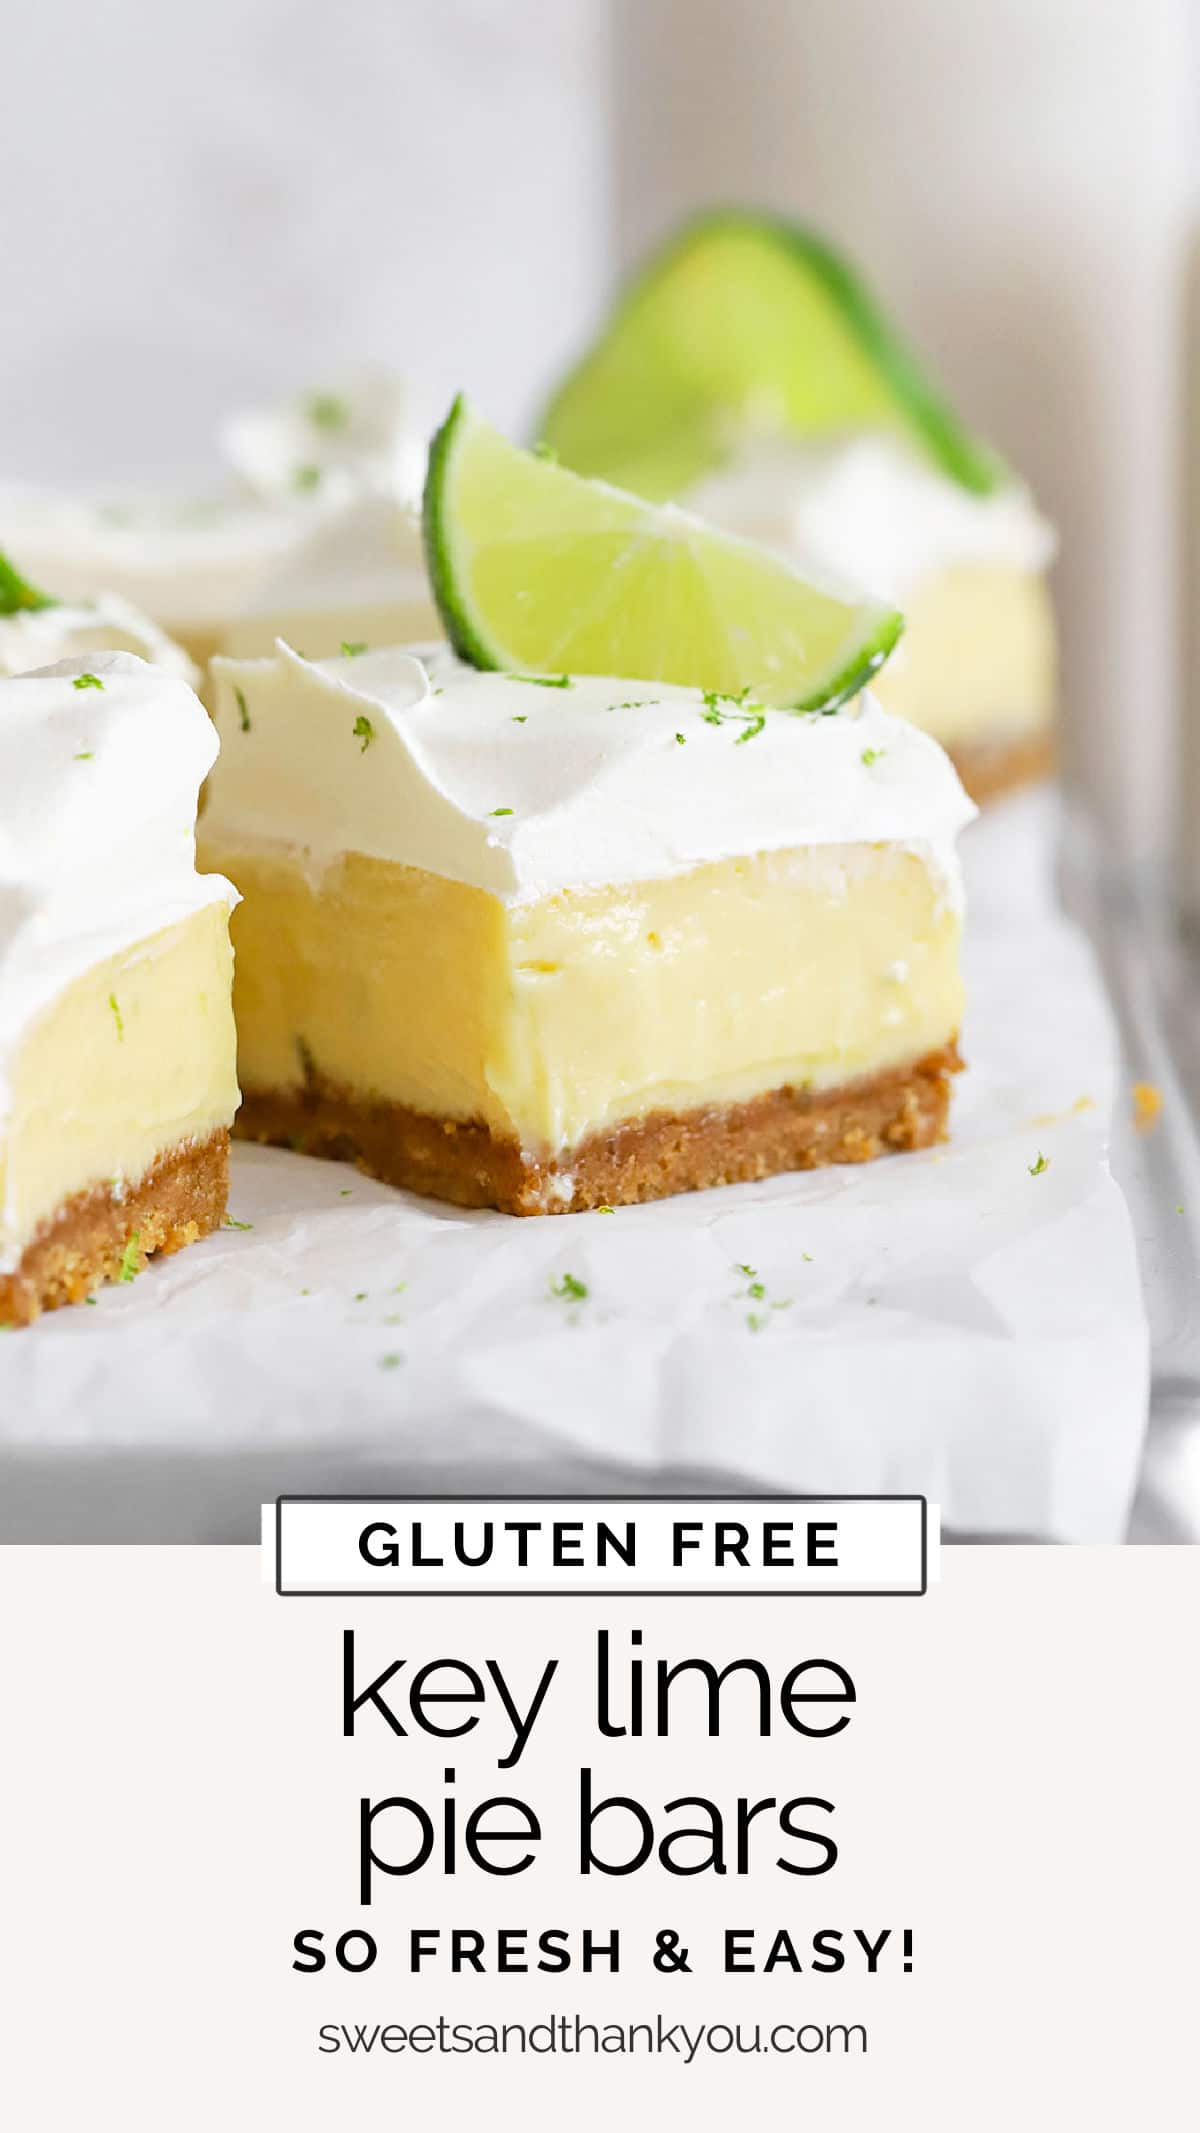 Gluten-Free Key Lime Pie Bar - Everything you love about key lime pie made easier! These key lime pie bars are fresh, bright, and so easy to make! // gluten-free key lime pie // gluten free pie bars // easy key lime pie // key lime pie filling // gluten free graham cracker crust // gluten-free key lime pie filling // easy gluten-free dessert // summer recipes // gluten free pie // 